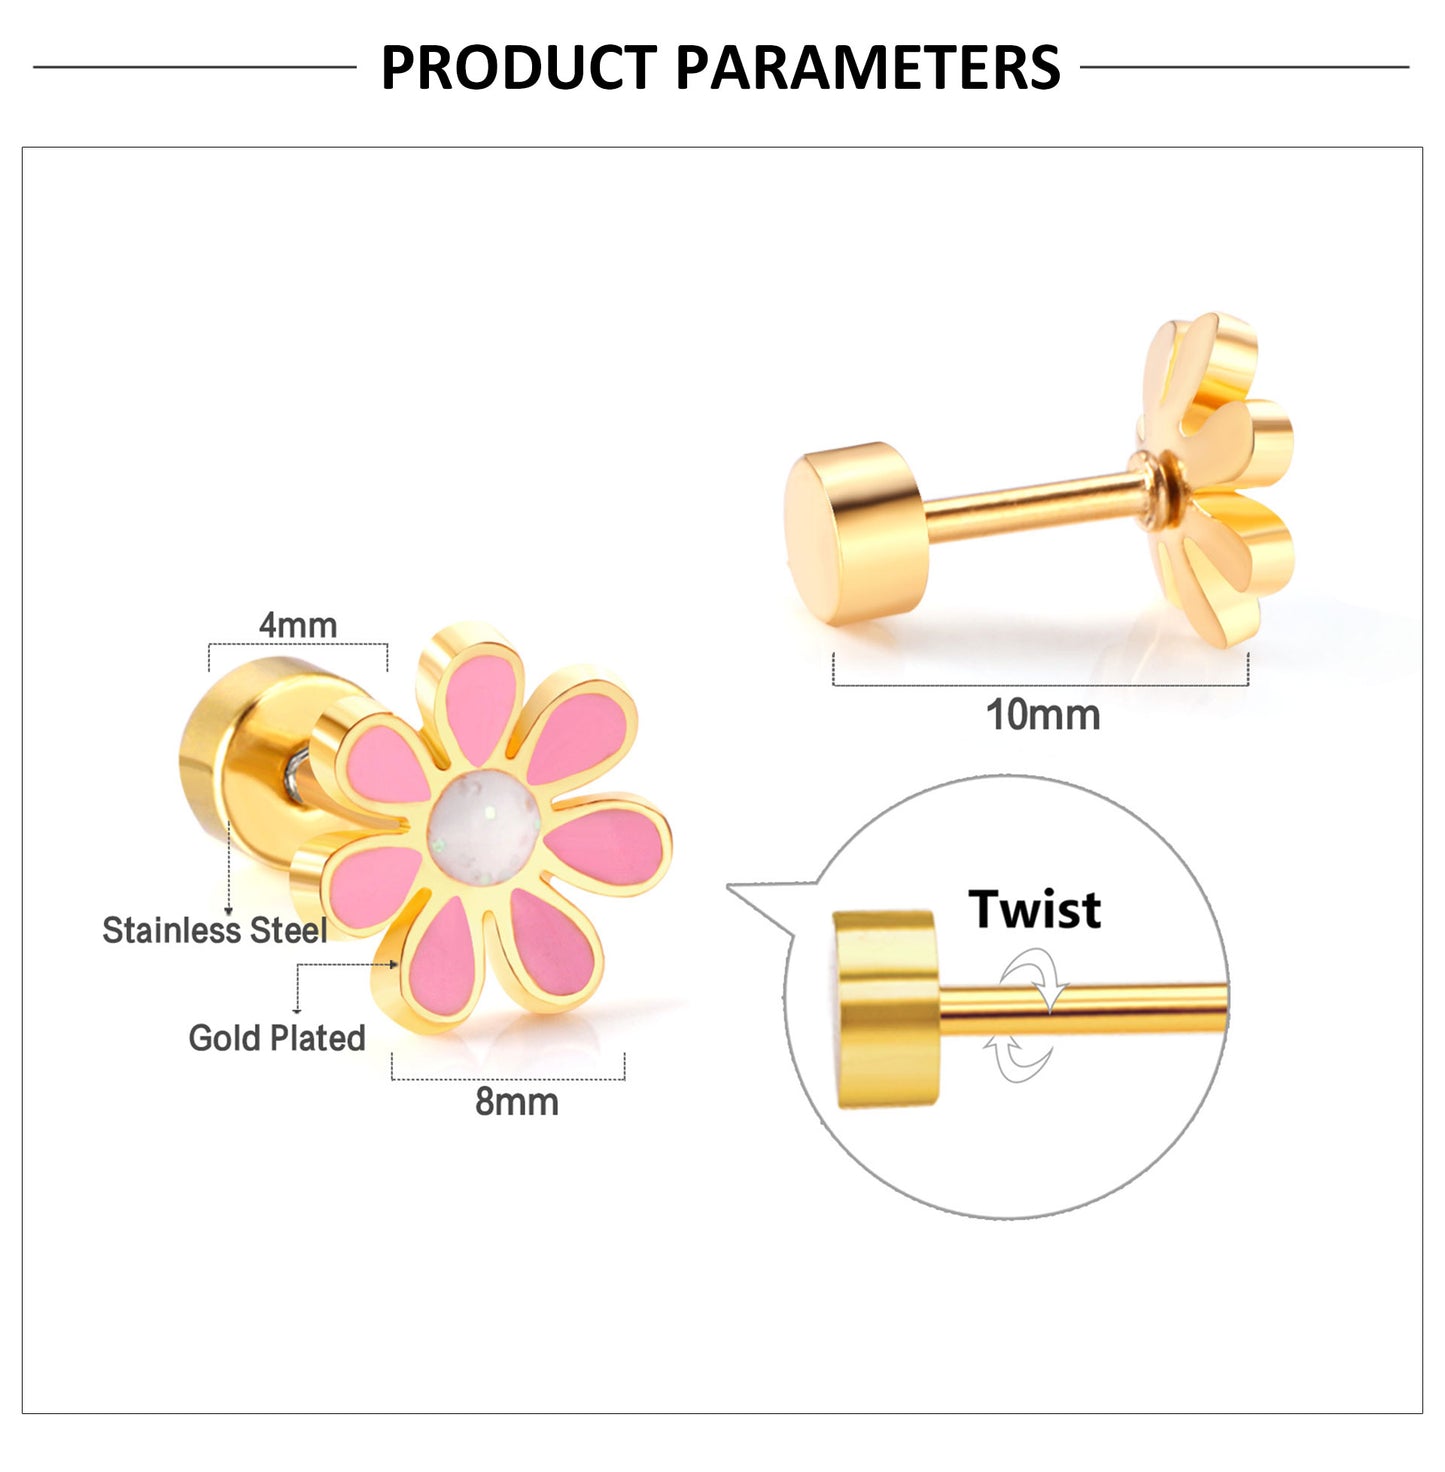 Children's Earrings:  Surgical Steel with Gold IP White/Pink Flowers with Screw Backs with Gift Box